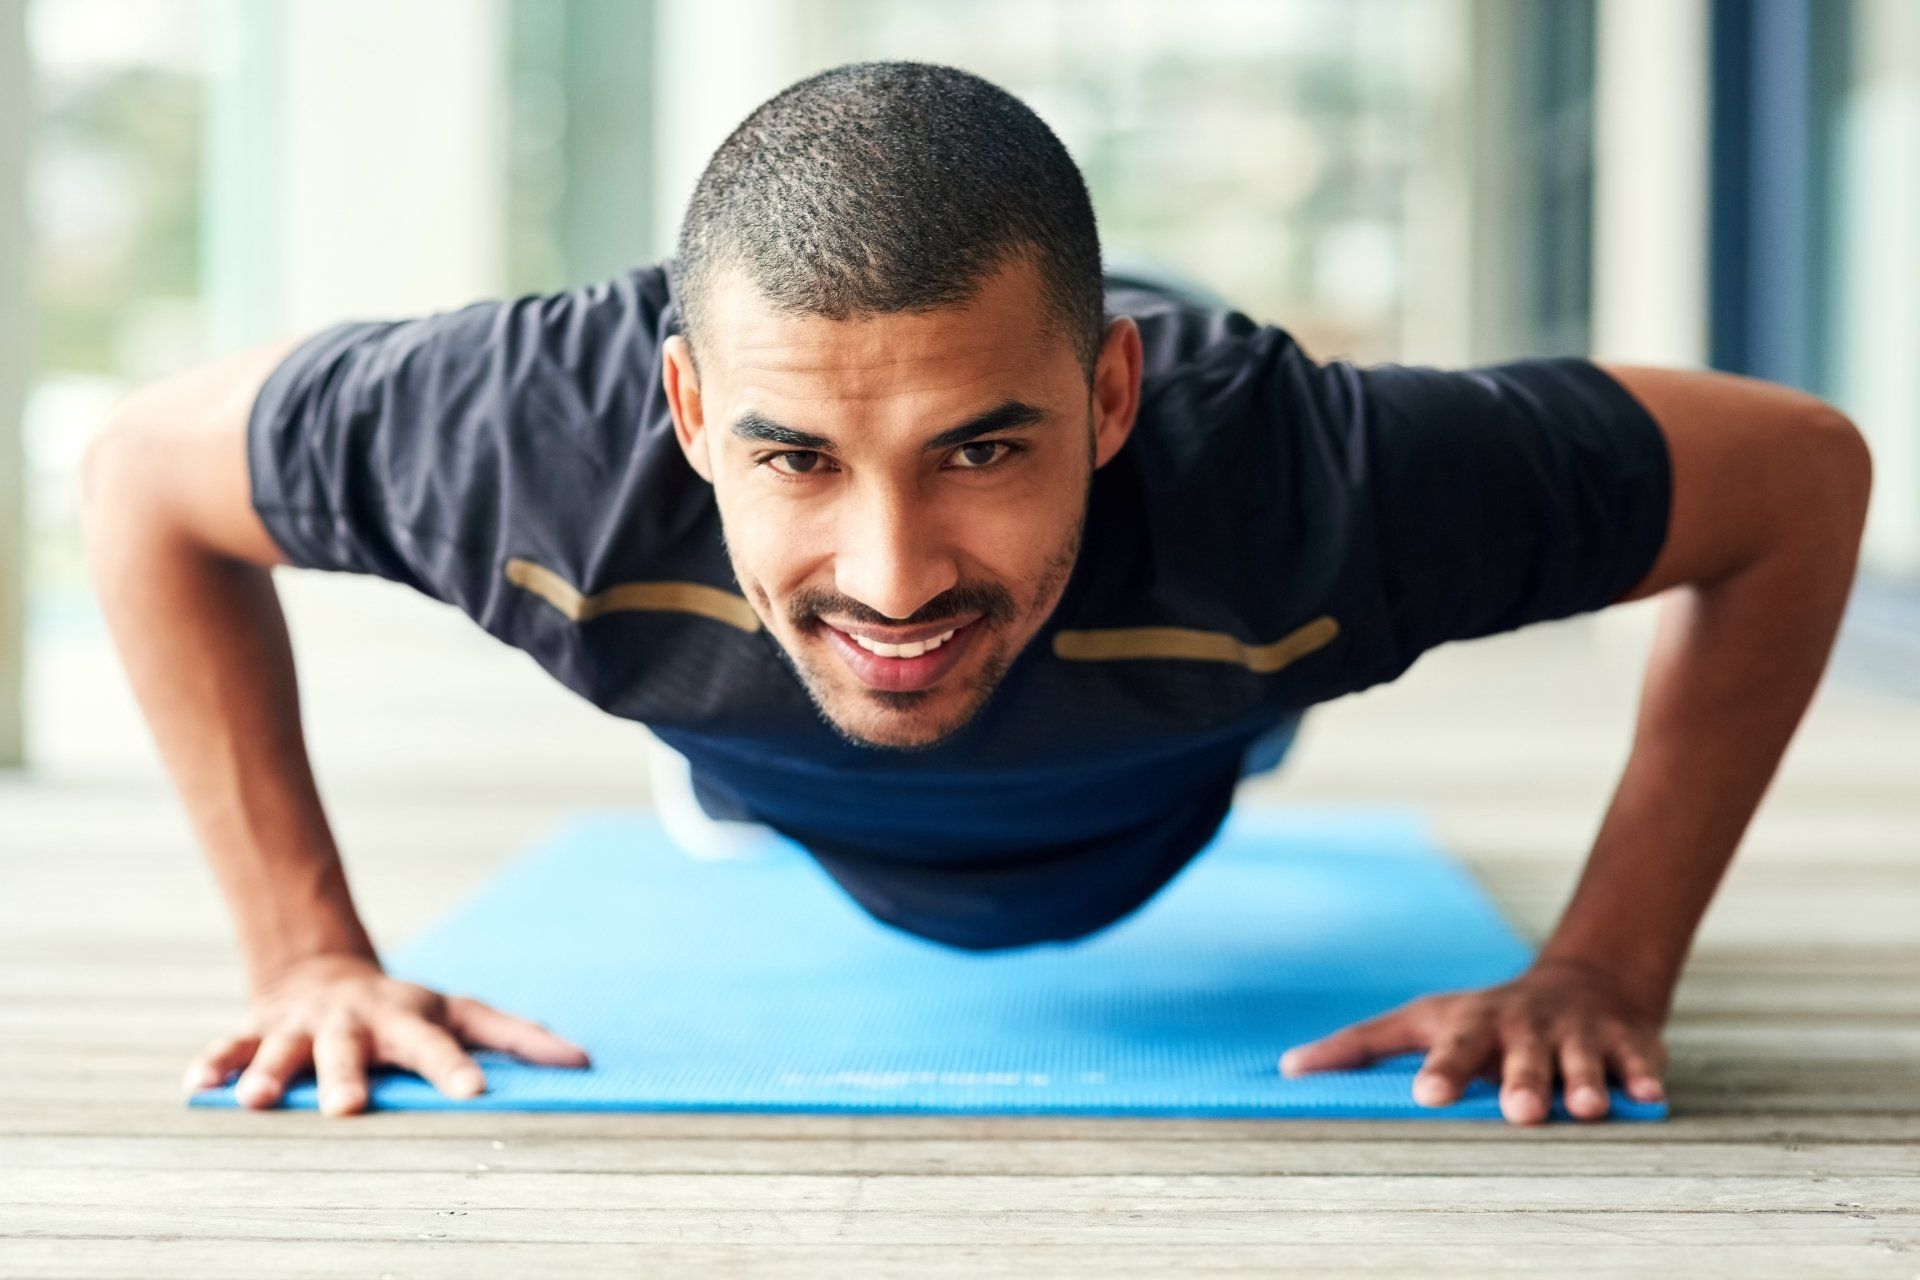 Man getting ready for THE PUSH-UP CHALLENGE for mental health support